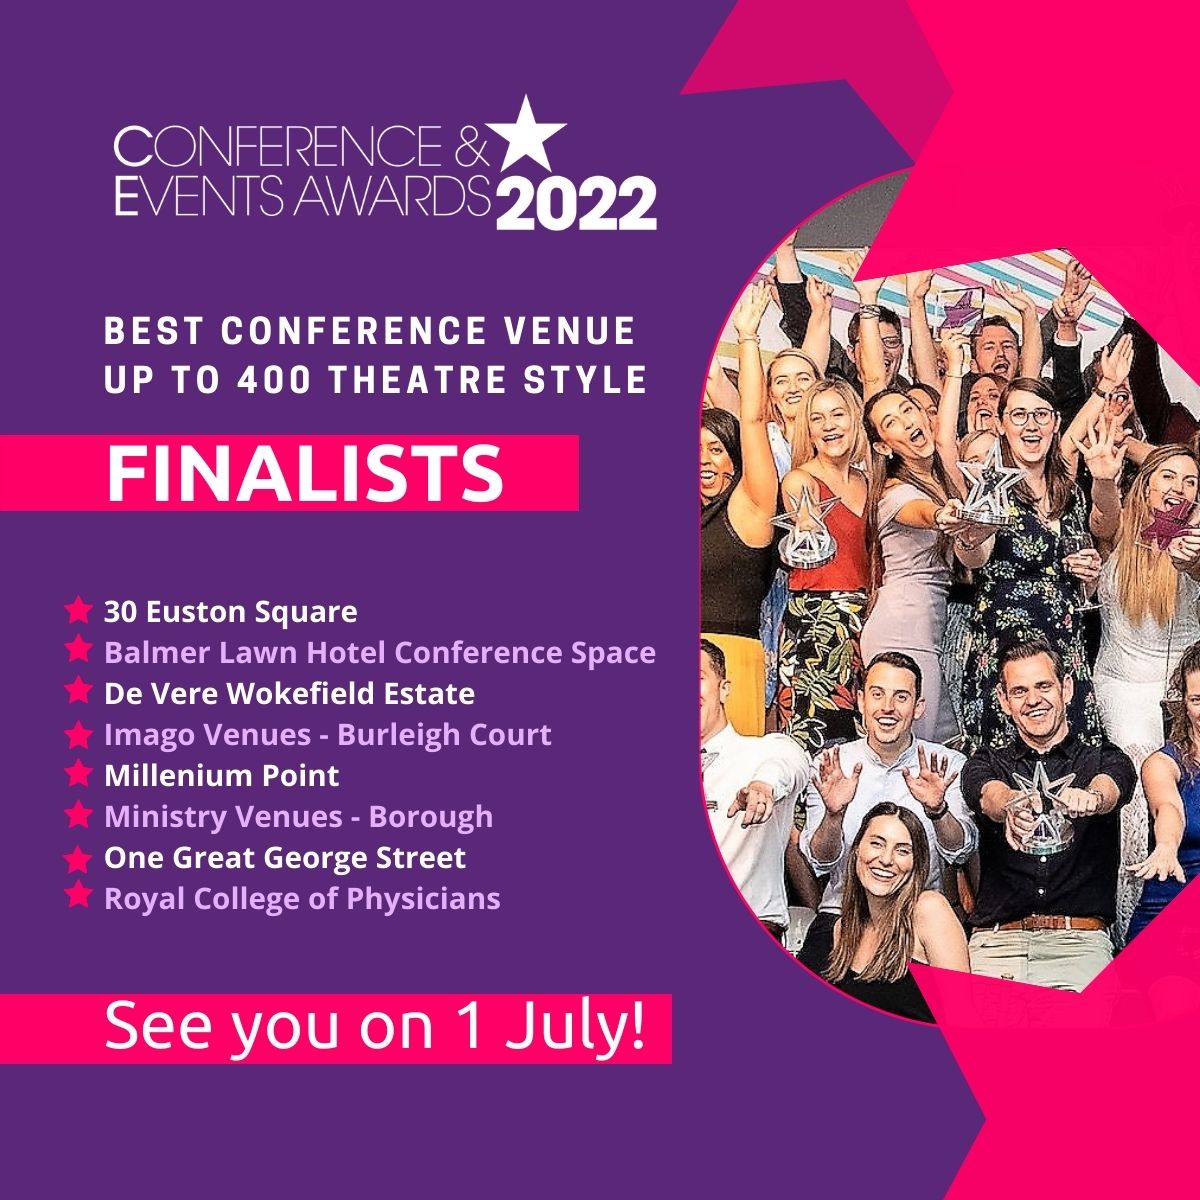 Congratulations to the finalists in the Best Conference Venue up to 400 Theatre Style category at the #ConfAwards. Good luck to all! Looking forward to celebrating the winners on 1 July ➡️bit.ly/3FQ9mYL